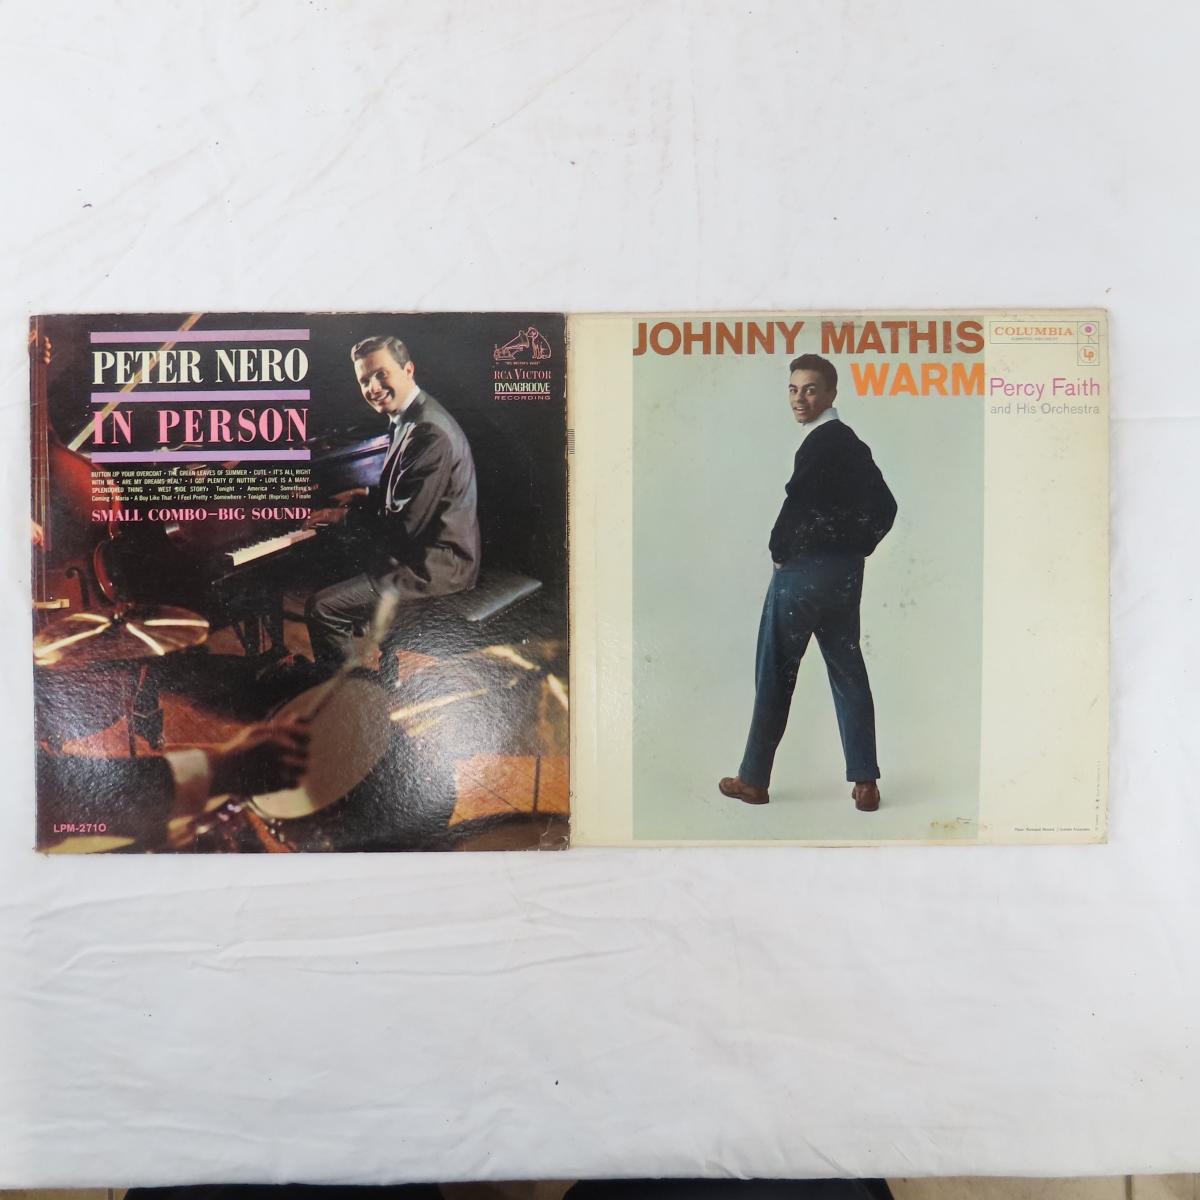 30+ Vintage Jazz & Country record albums